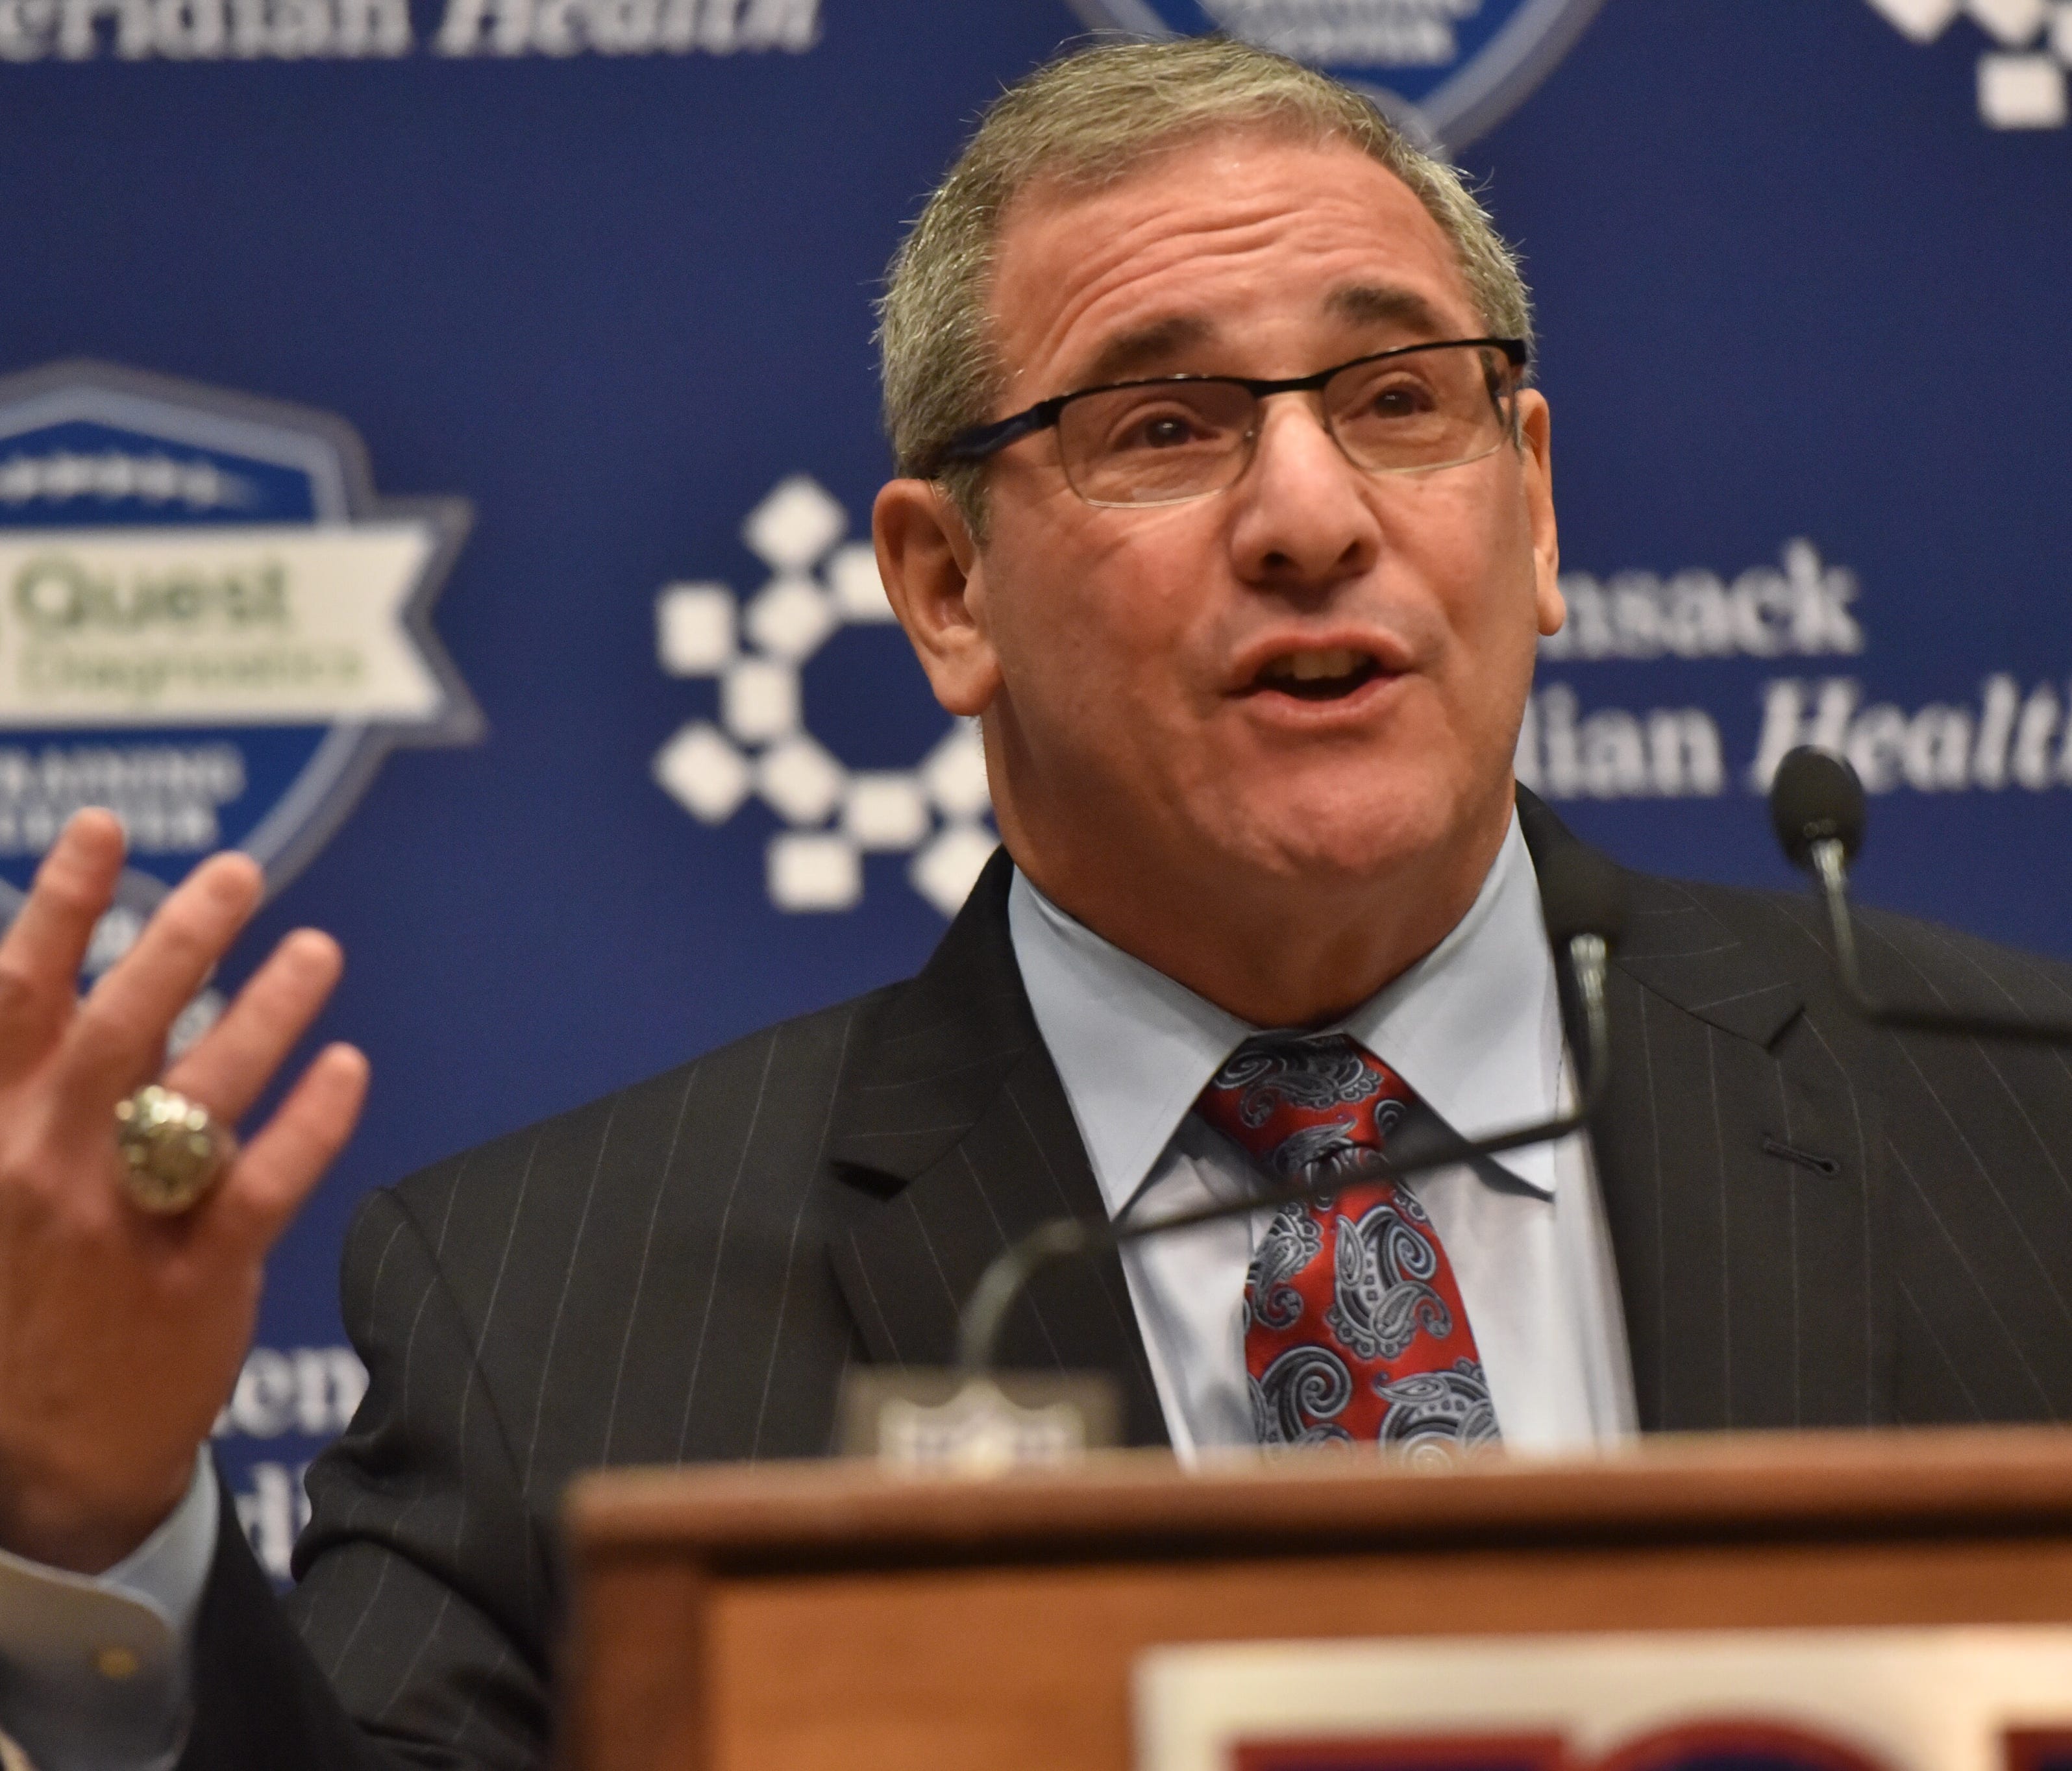 Giants new general manager Dave Gettleman is introduced at a press conference on Dec. 29, 2017.